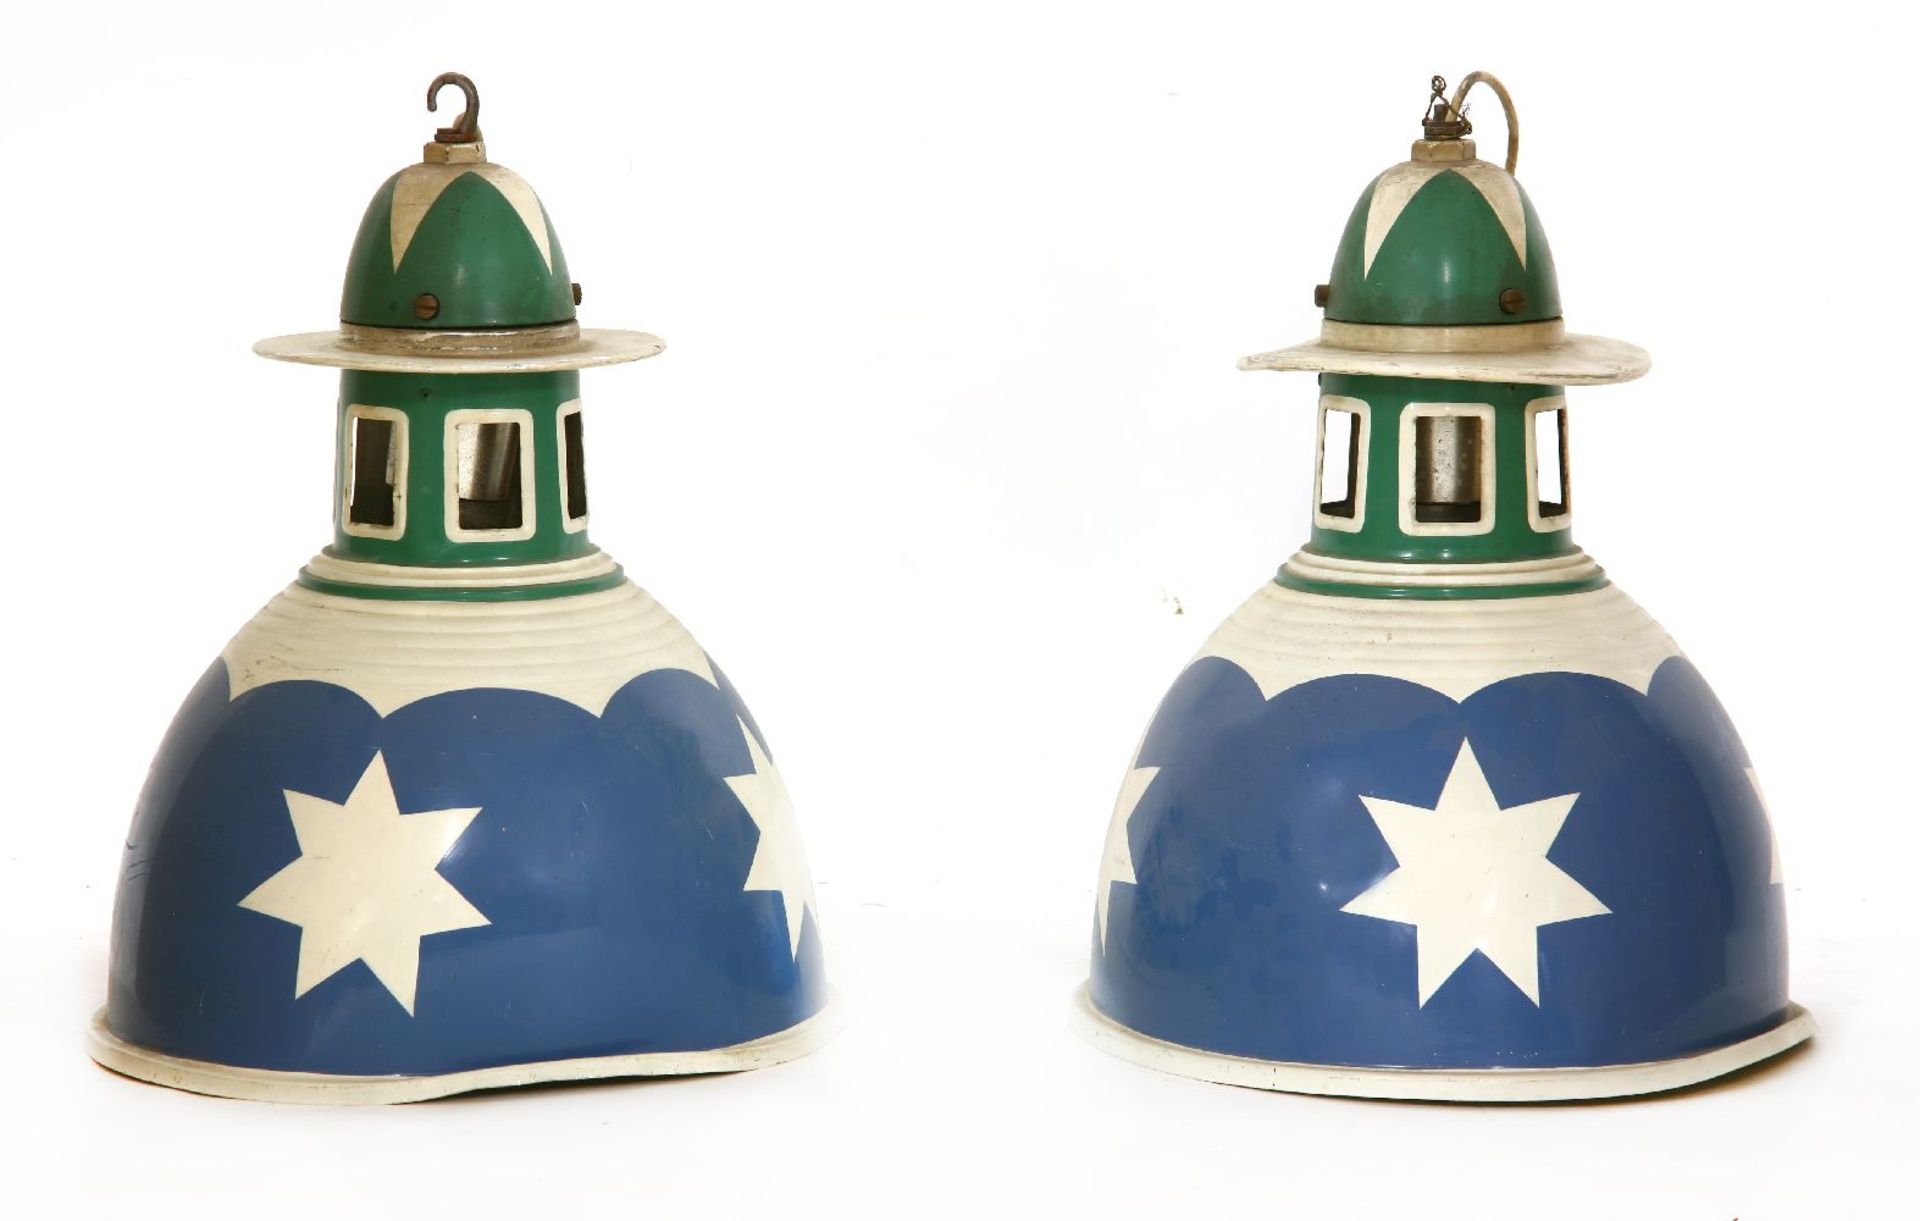 FAIRGROUND LAMPS,1950s or 60s, two impressive brightly painted metal fairground lamps, 52cm high (